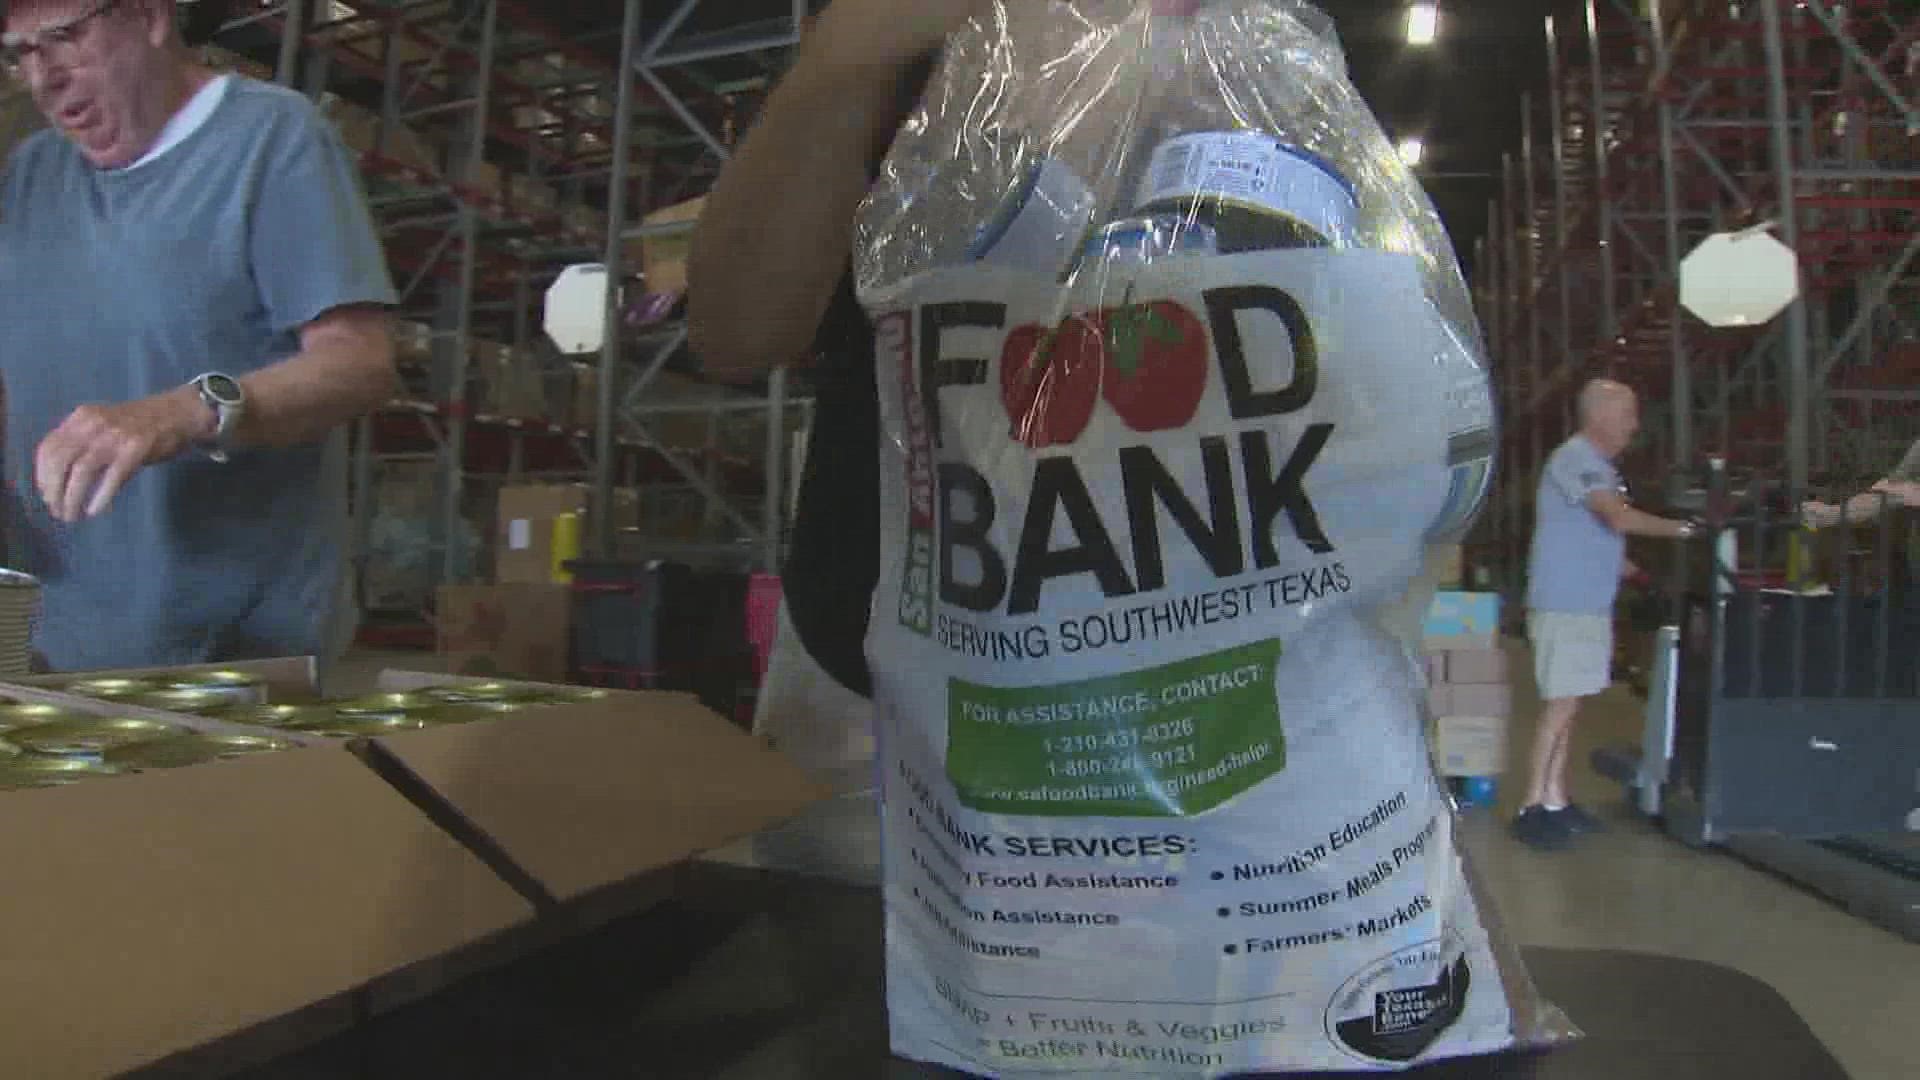 The San Antonio Food Bank's summer initiative is hoping to collect 20 million meals this summer.